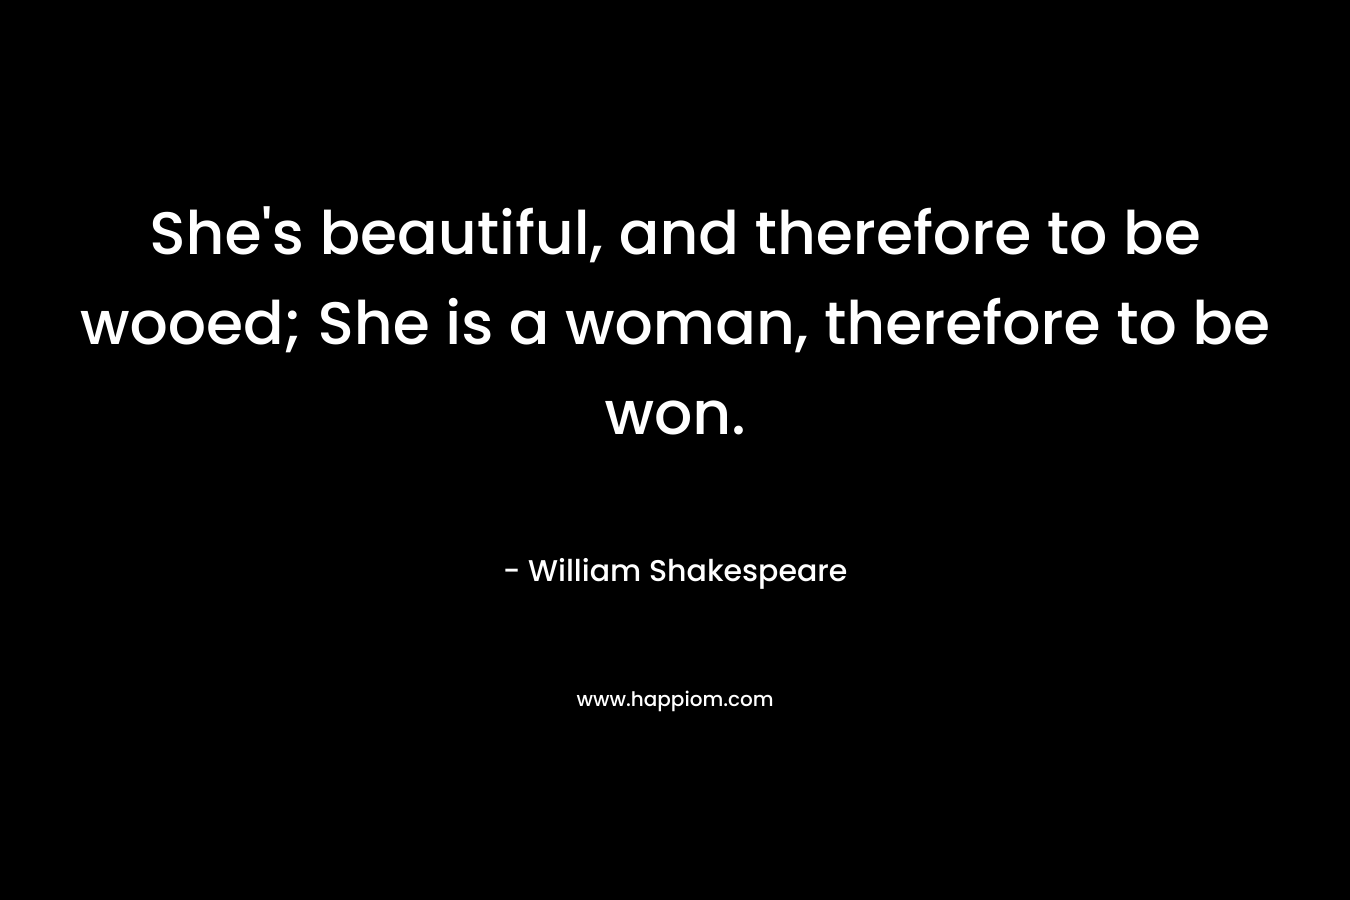 She's beautiful, and therefore to be wooed; She is a woman, therefore to be won.